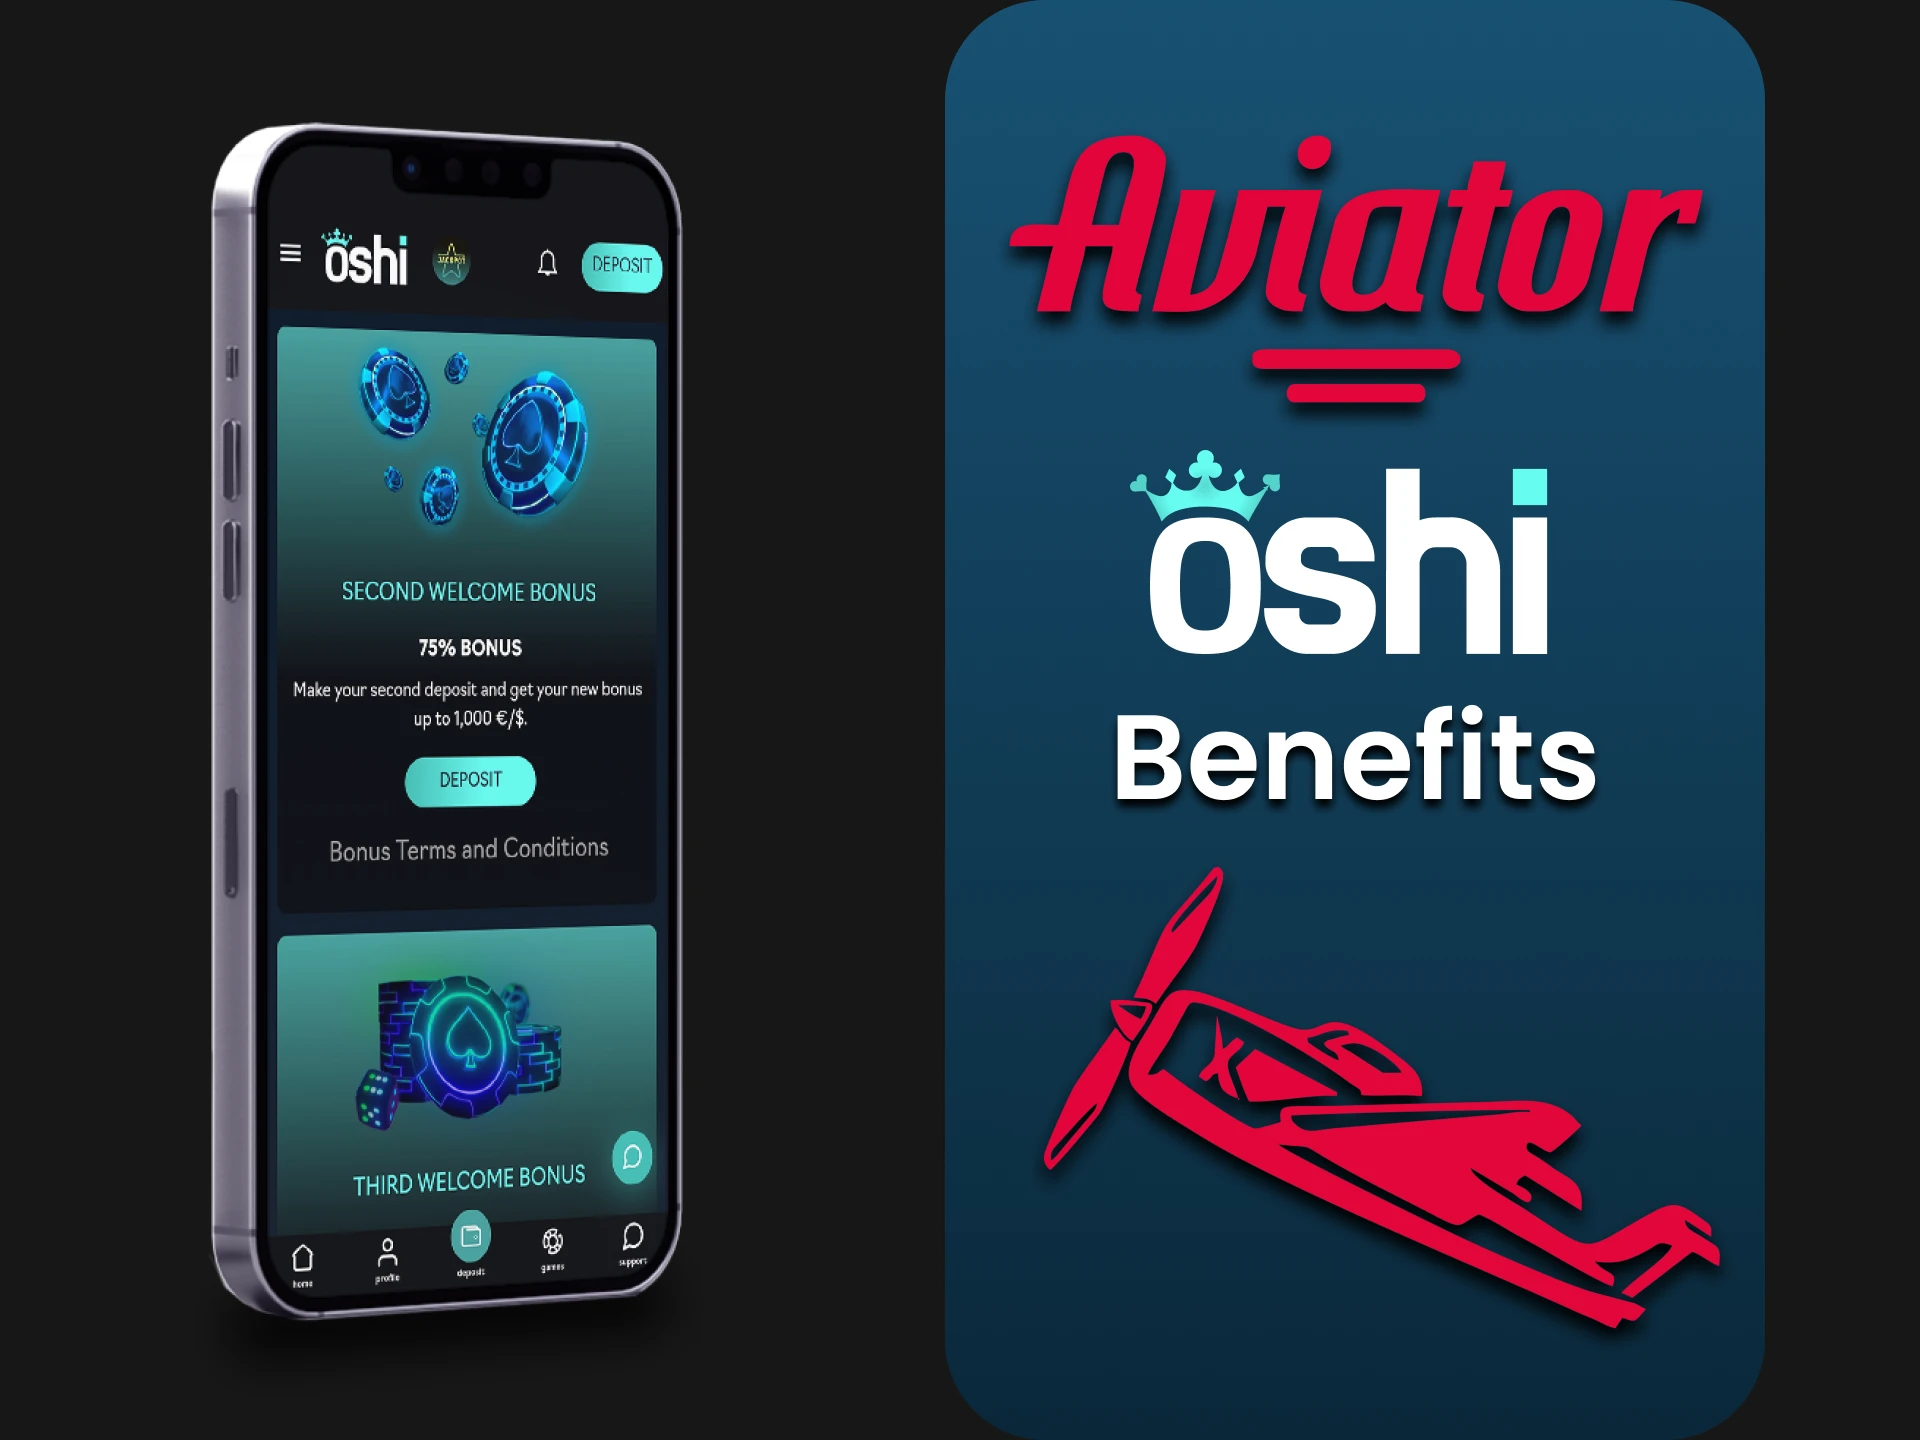 We will tell you about the benefits of the Oshi Casino application for Aviator.